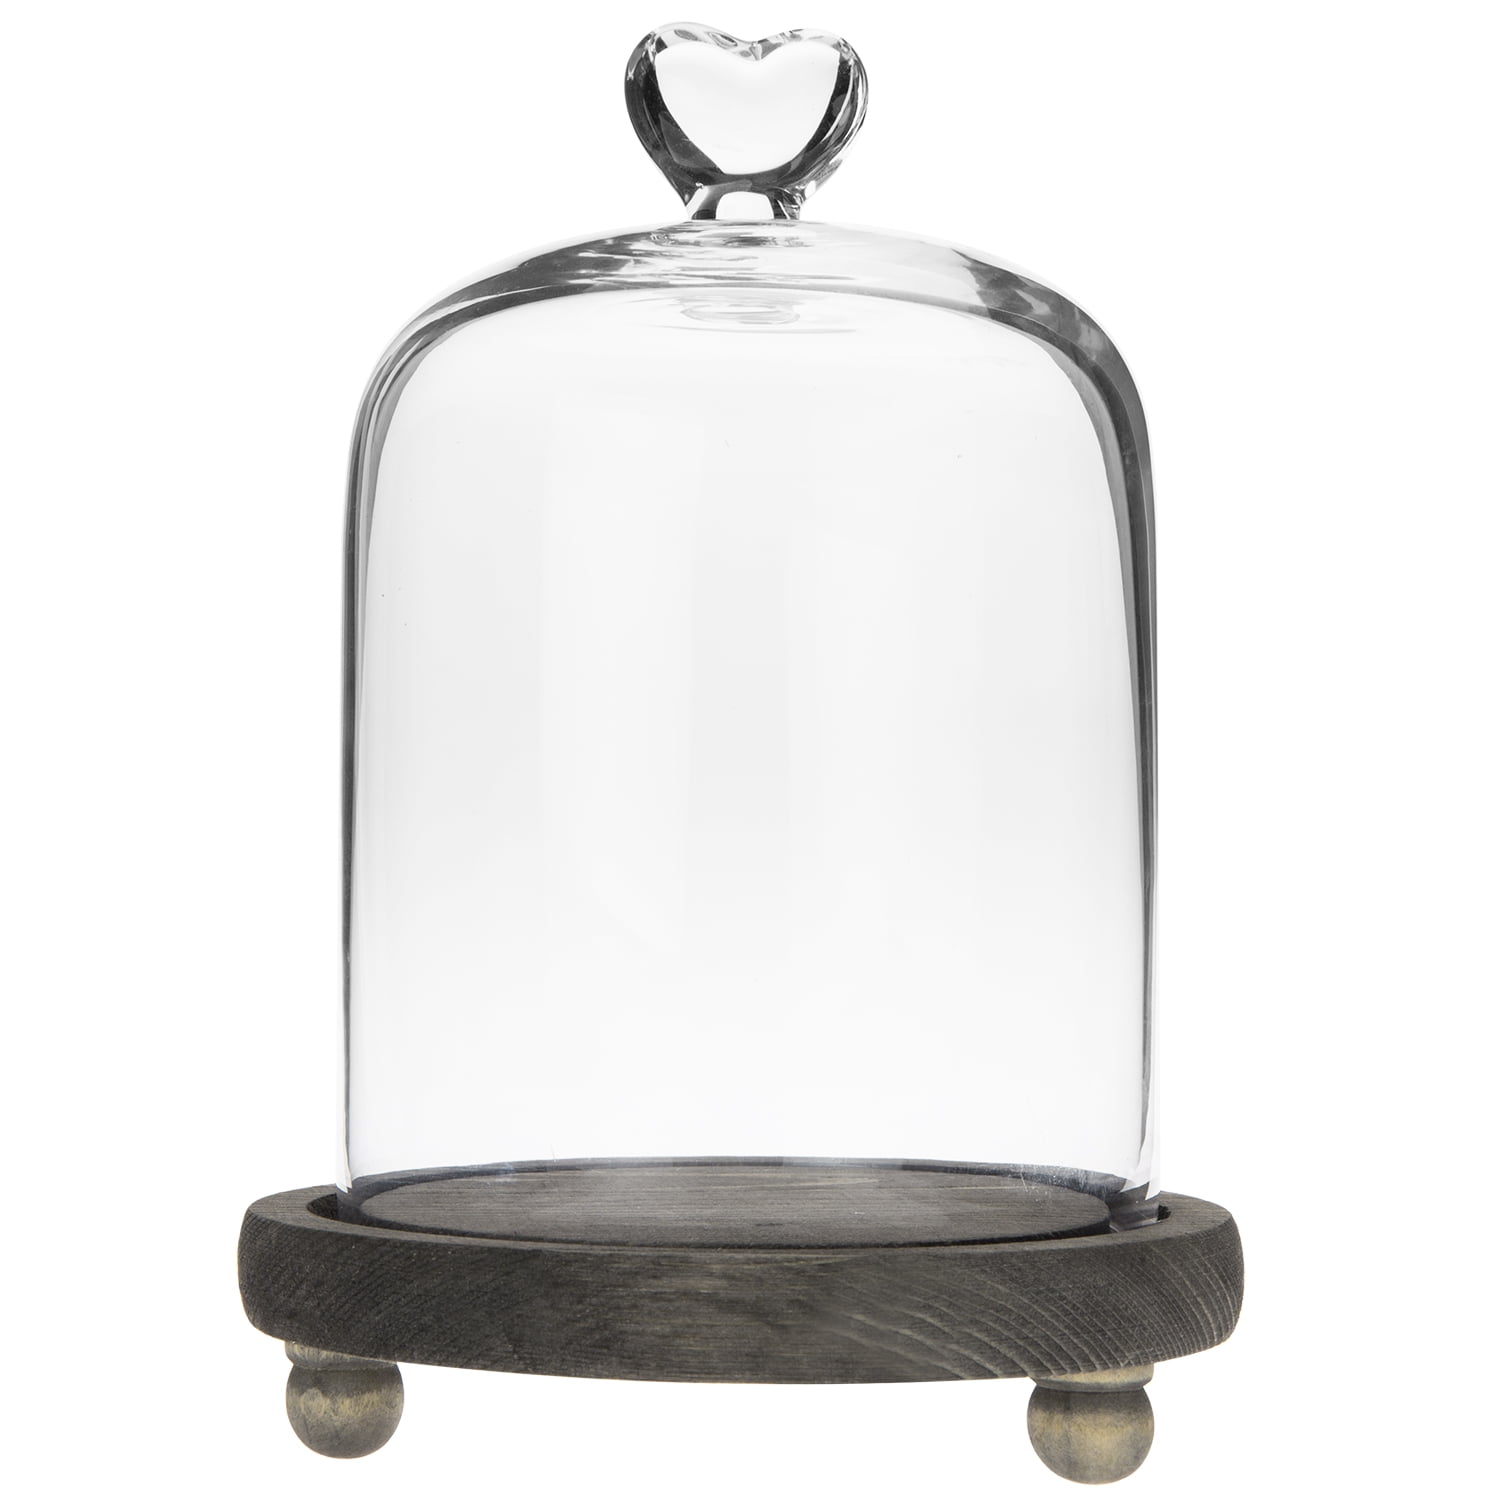 MyGift Clear Glass Cloche Dome Jar Display Centerpiece with Heart Handle & Gray Wood Base 